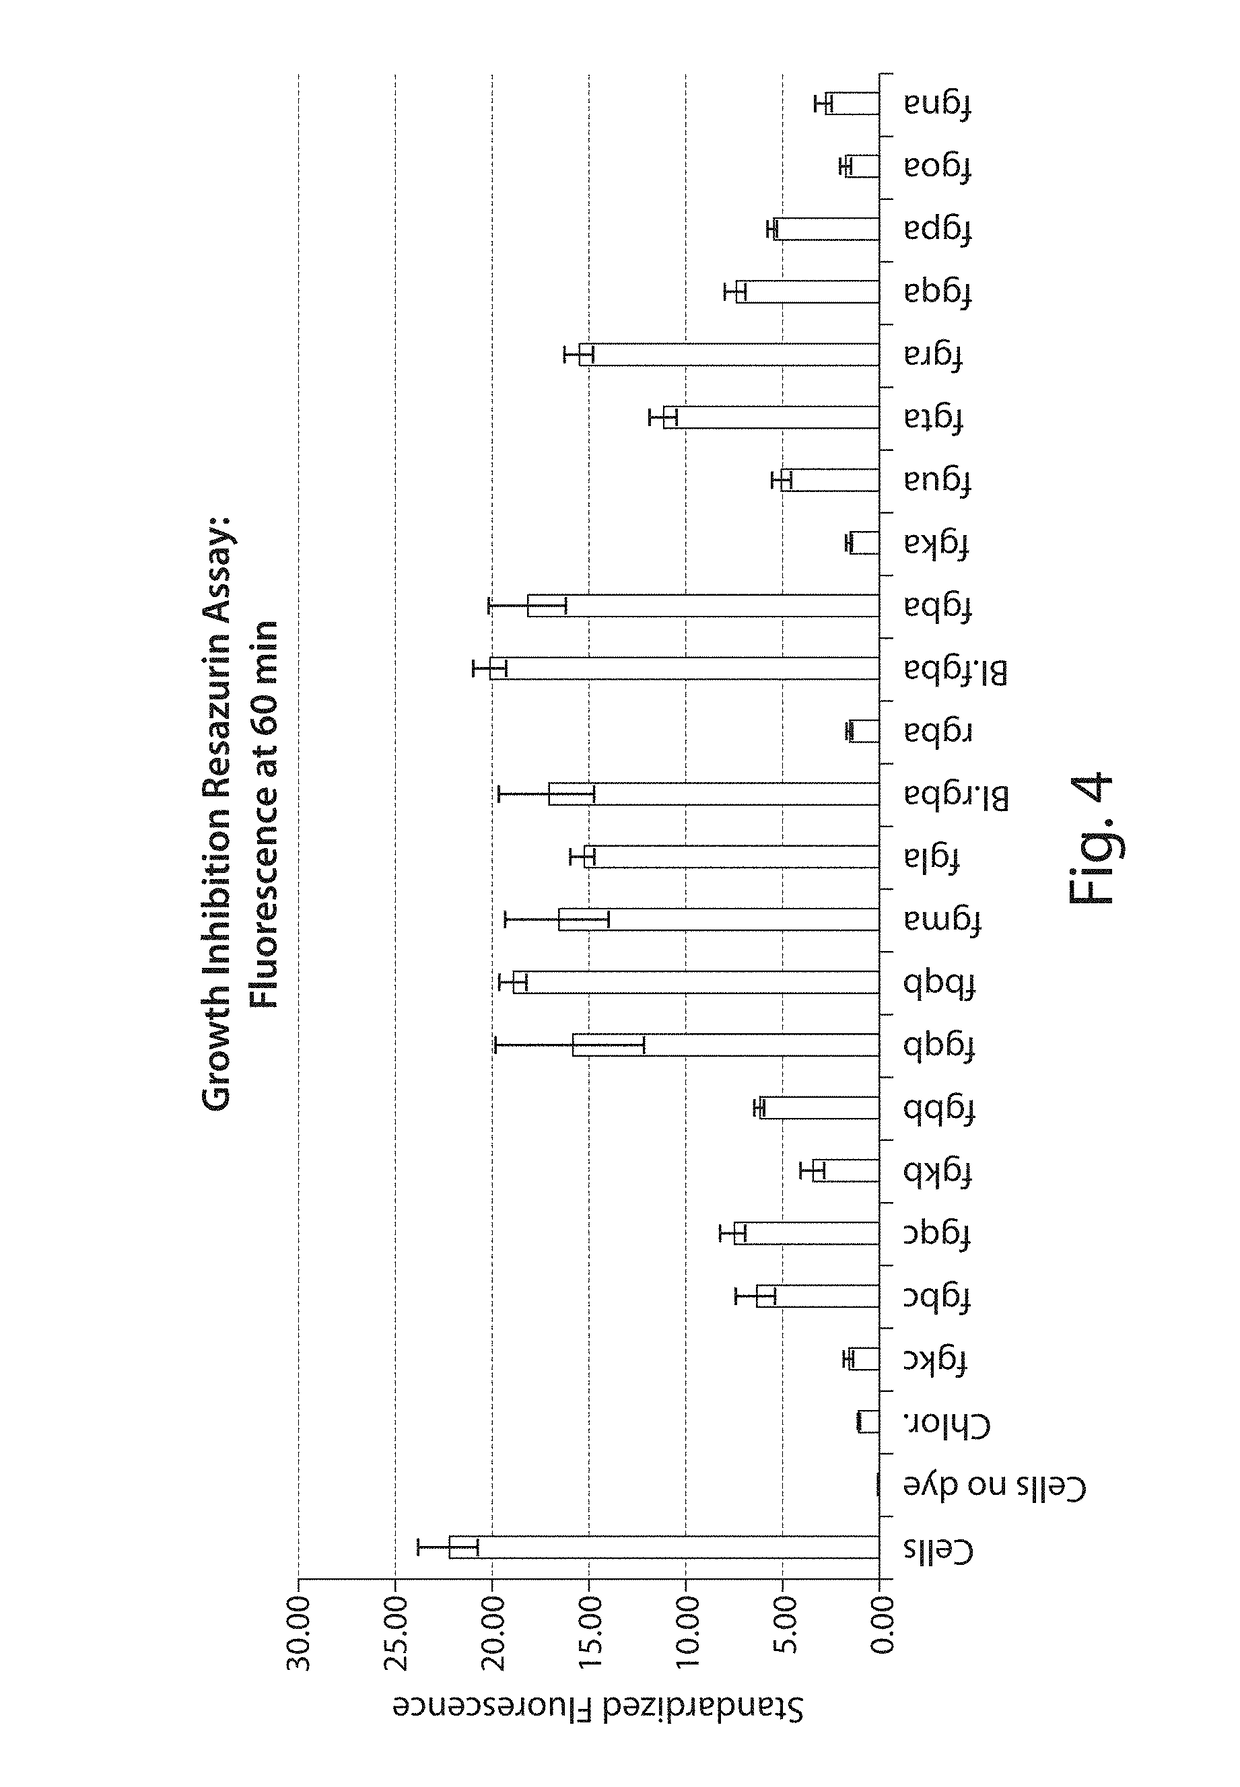 Novel Antibacterial Compounds and Methods of Making and Using Same